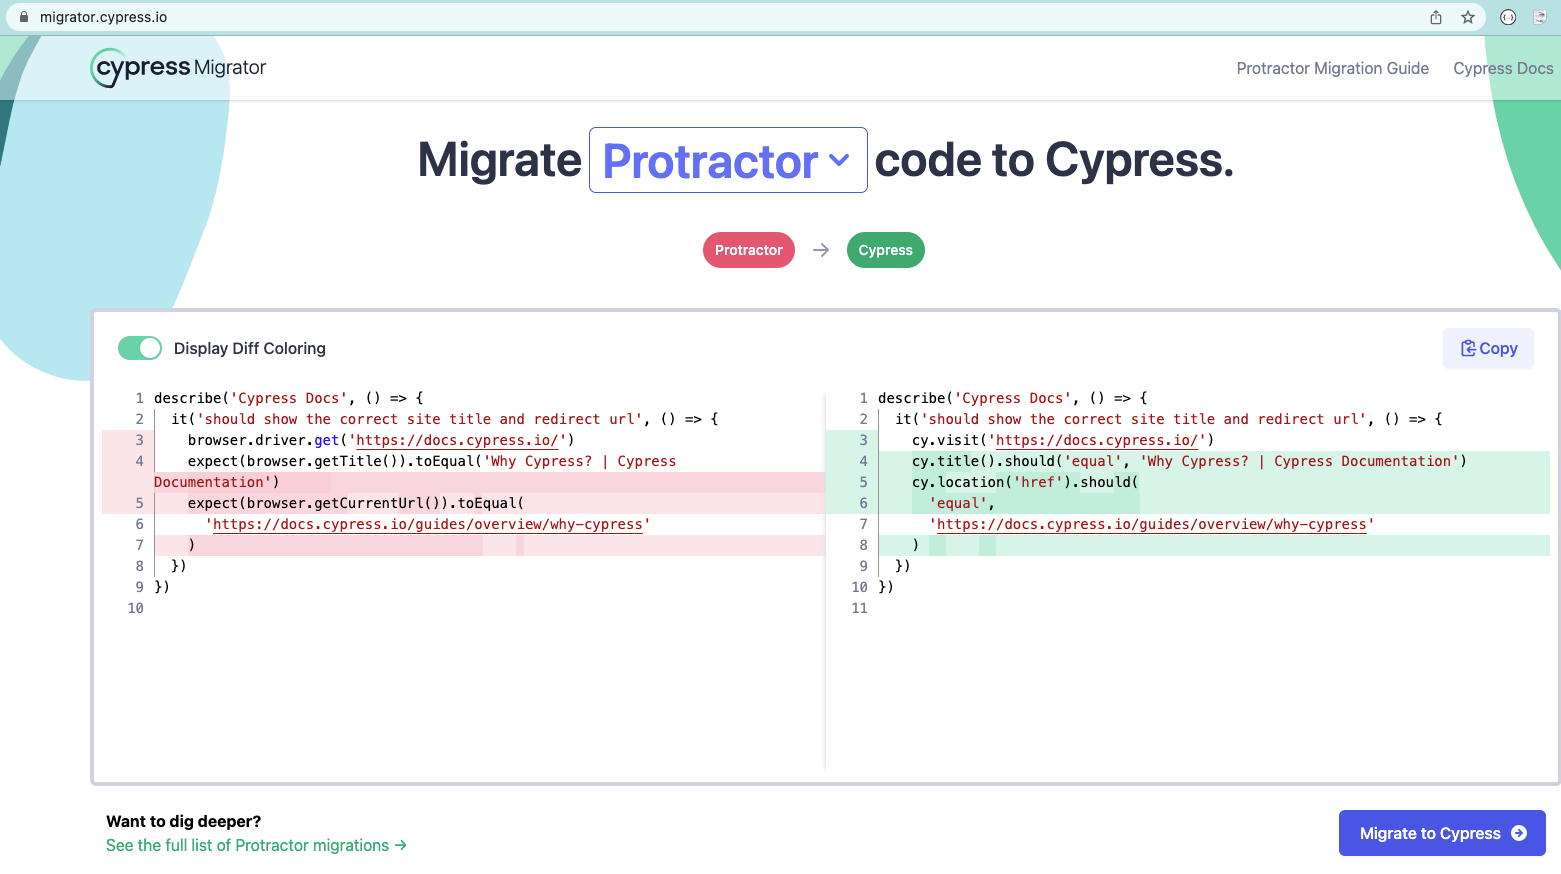 Migrating an example Protractor test to Cypress